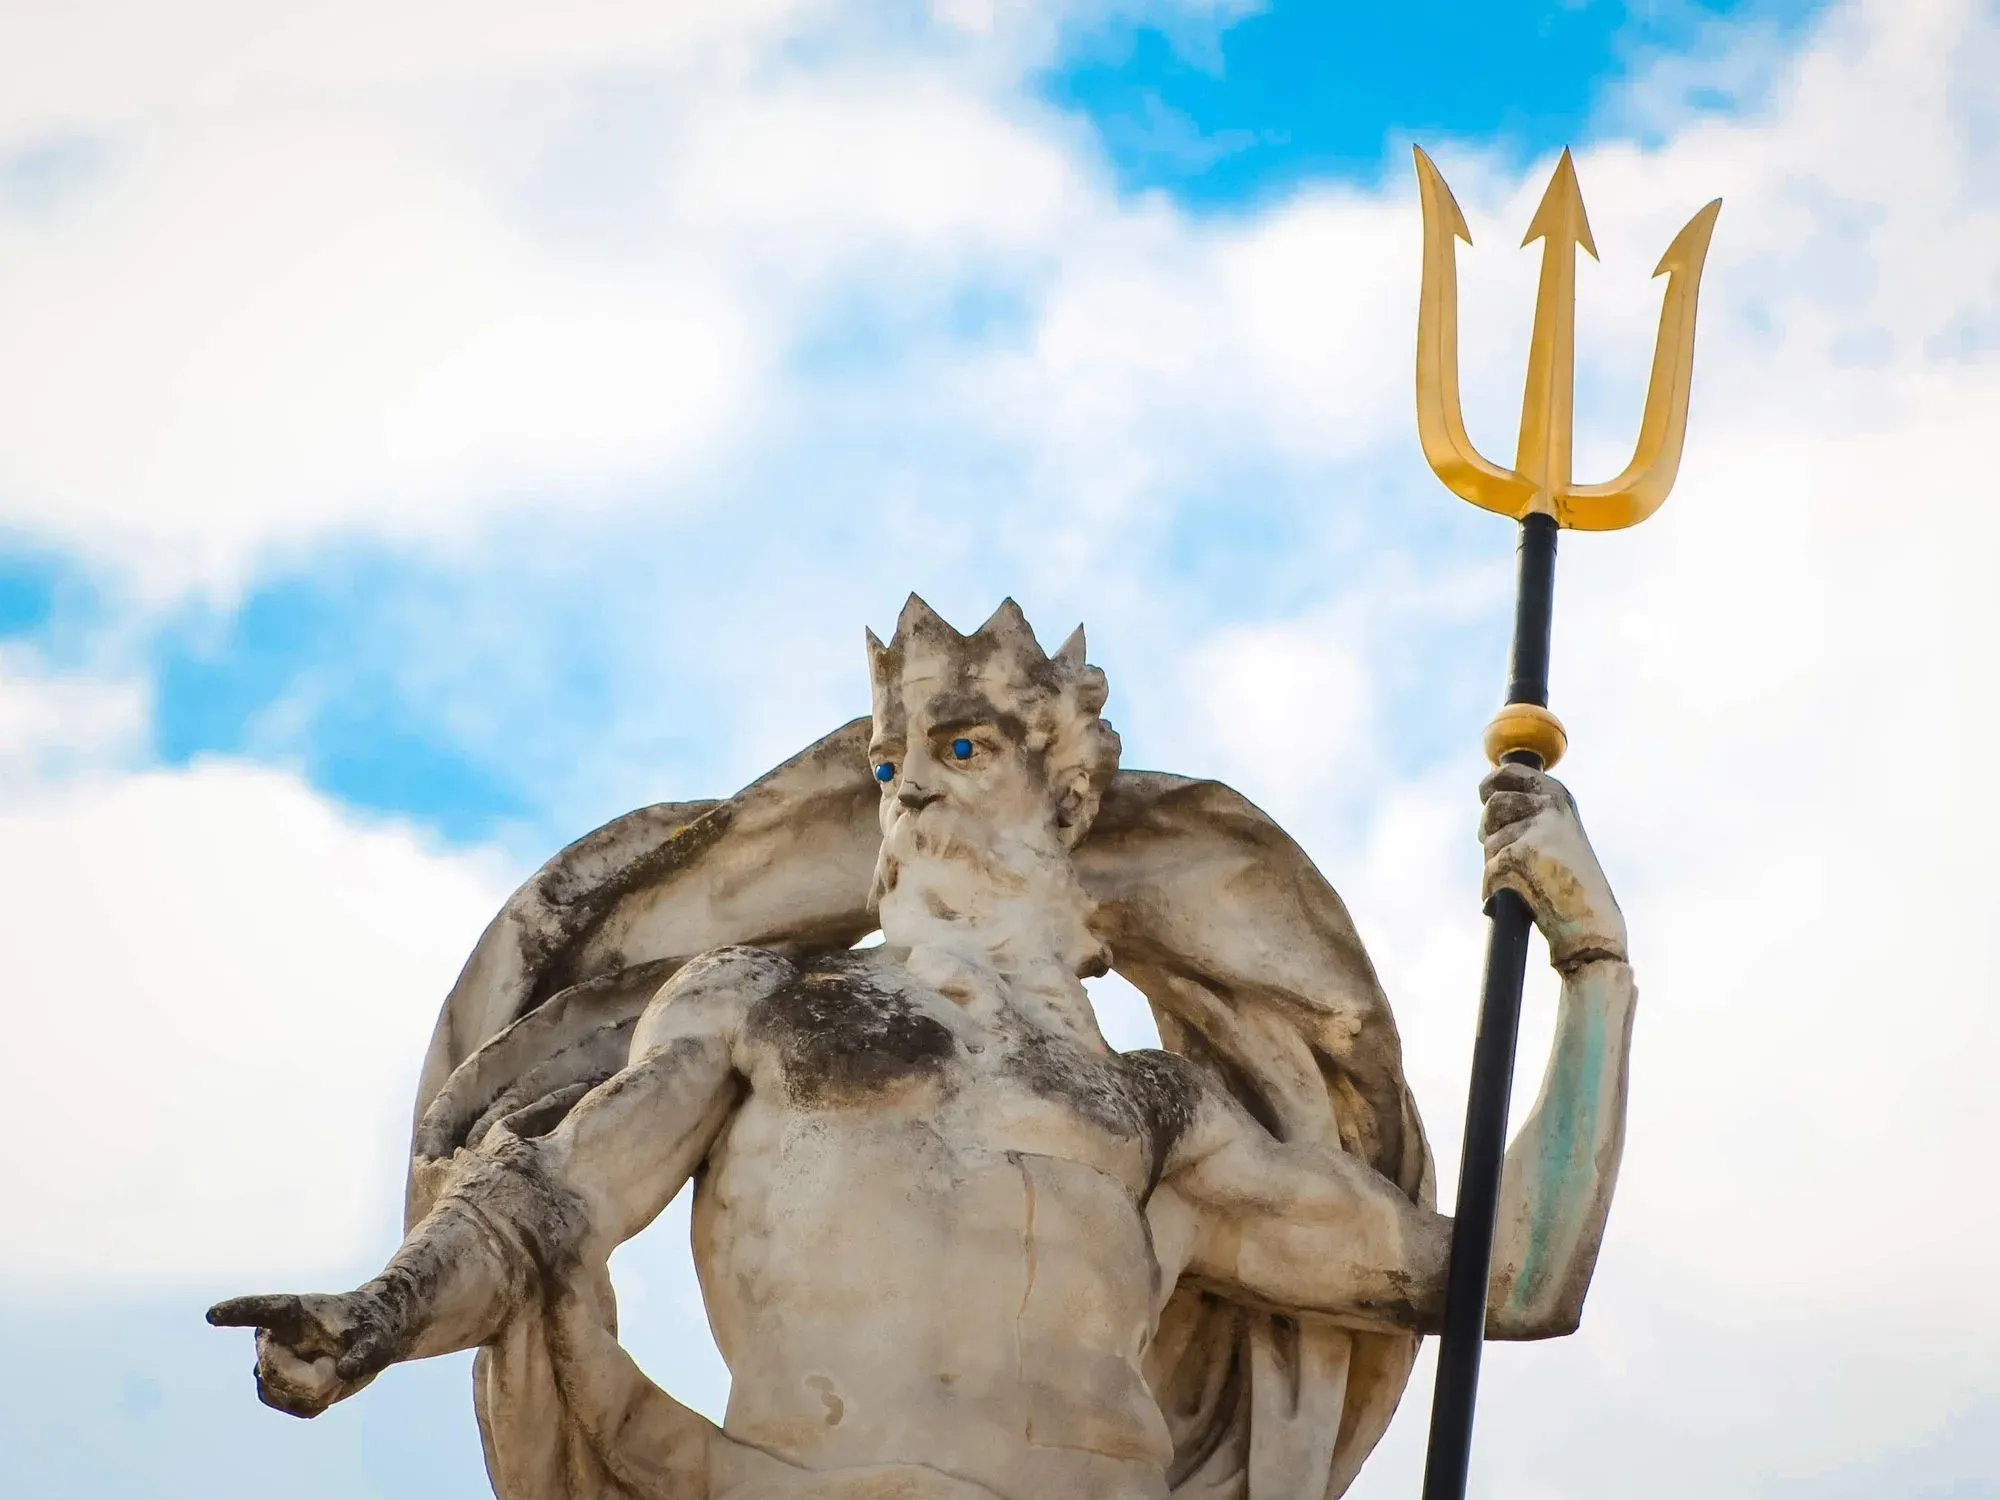 The Neptune god is responsible for controlling wind and storms in Roman mythology.